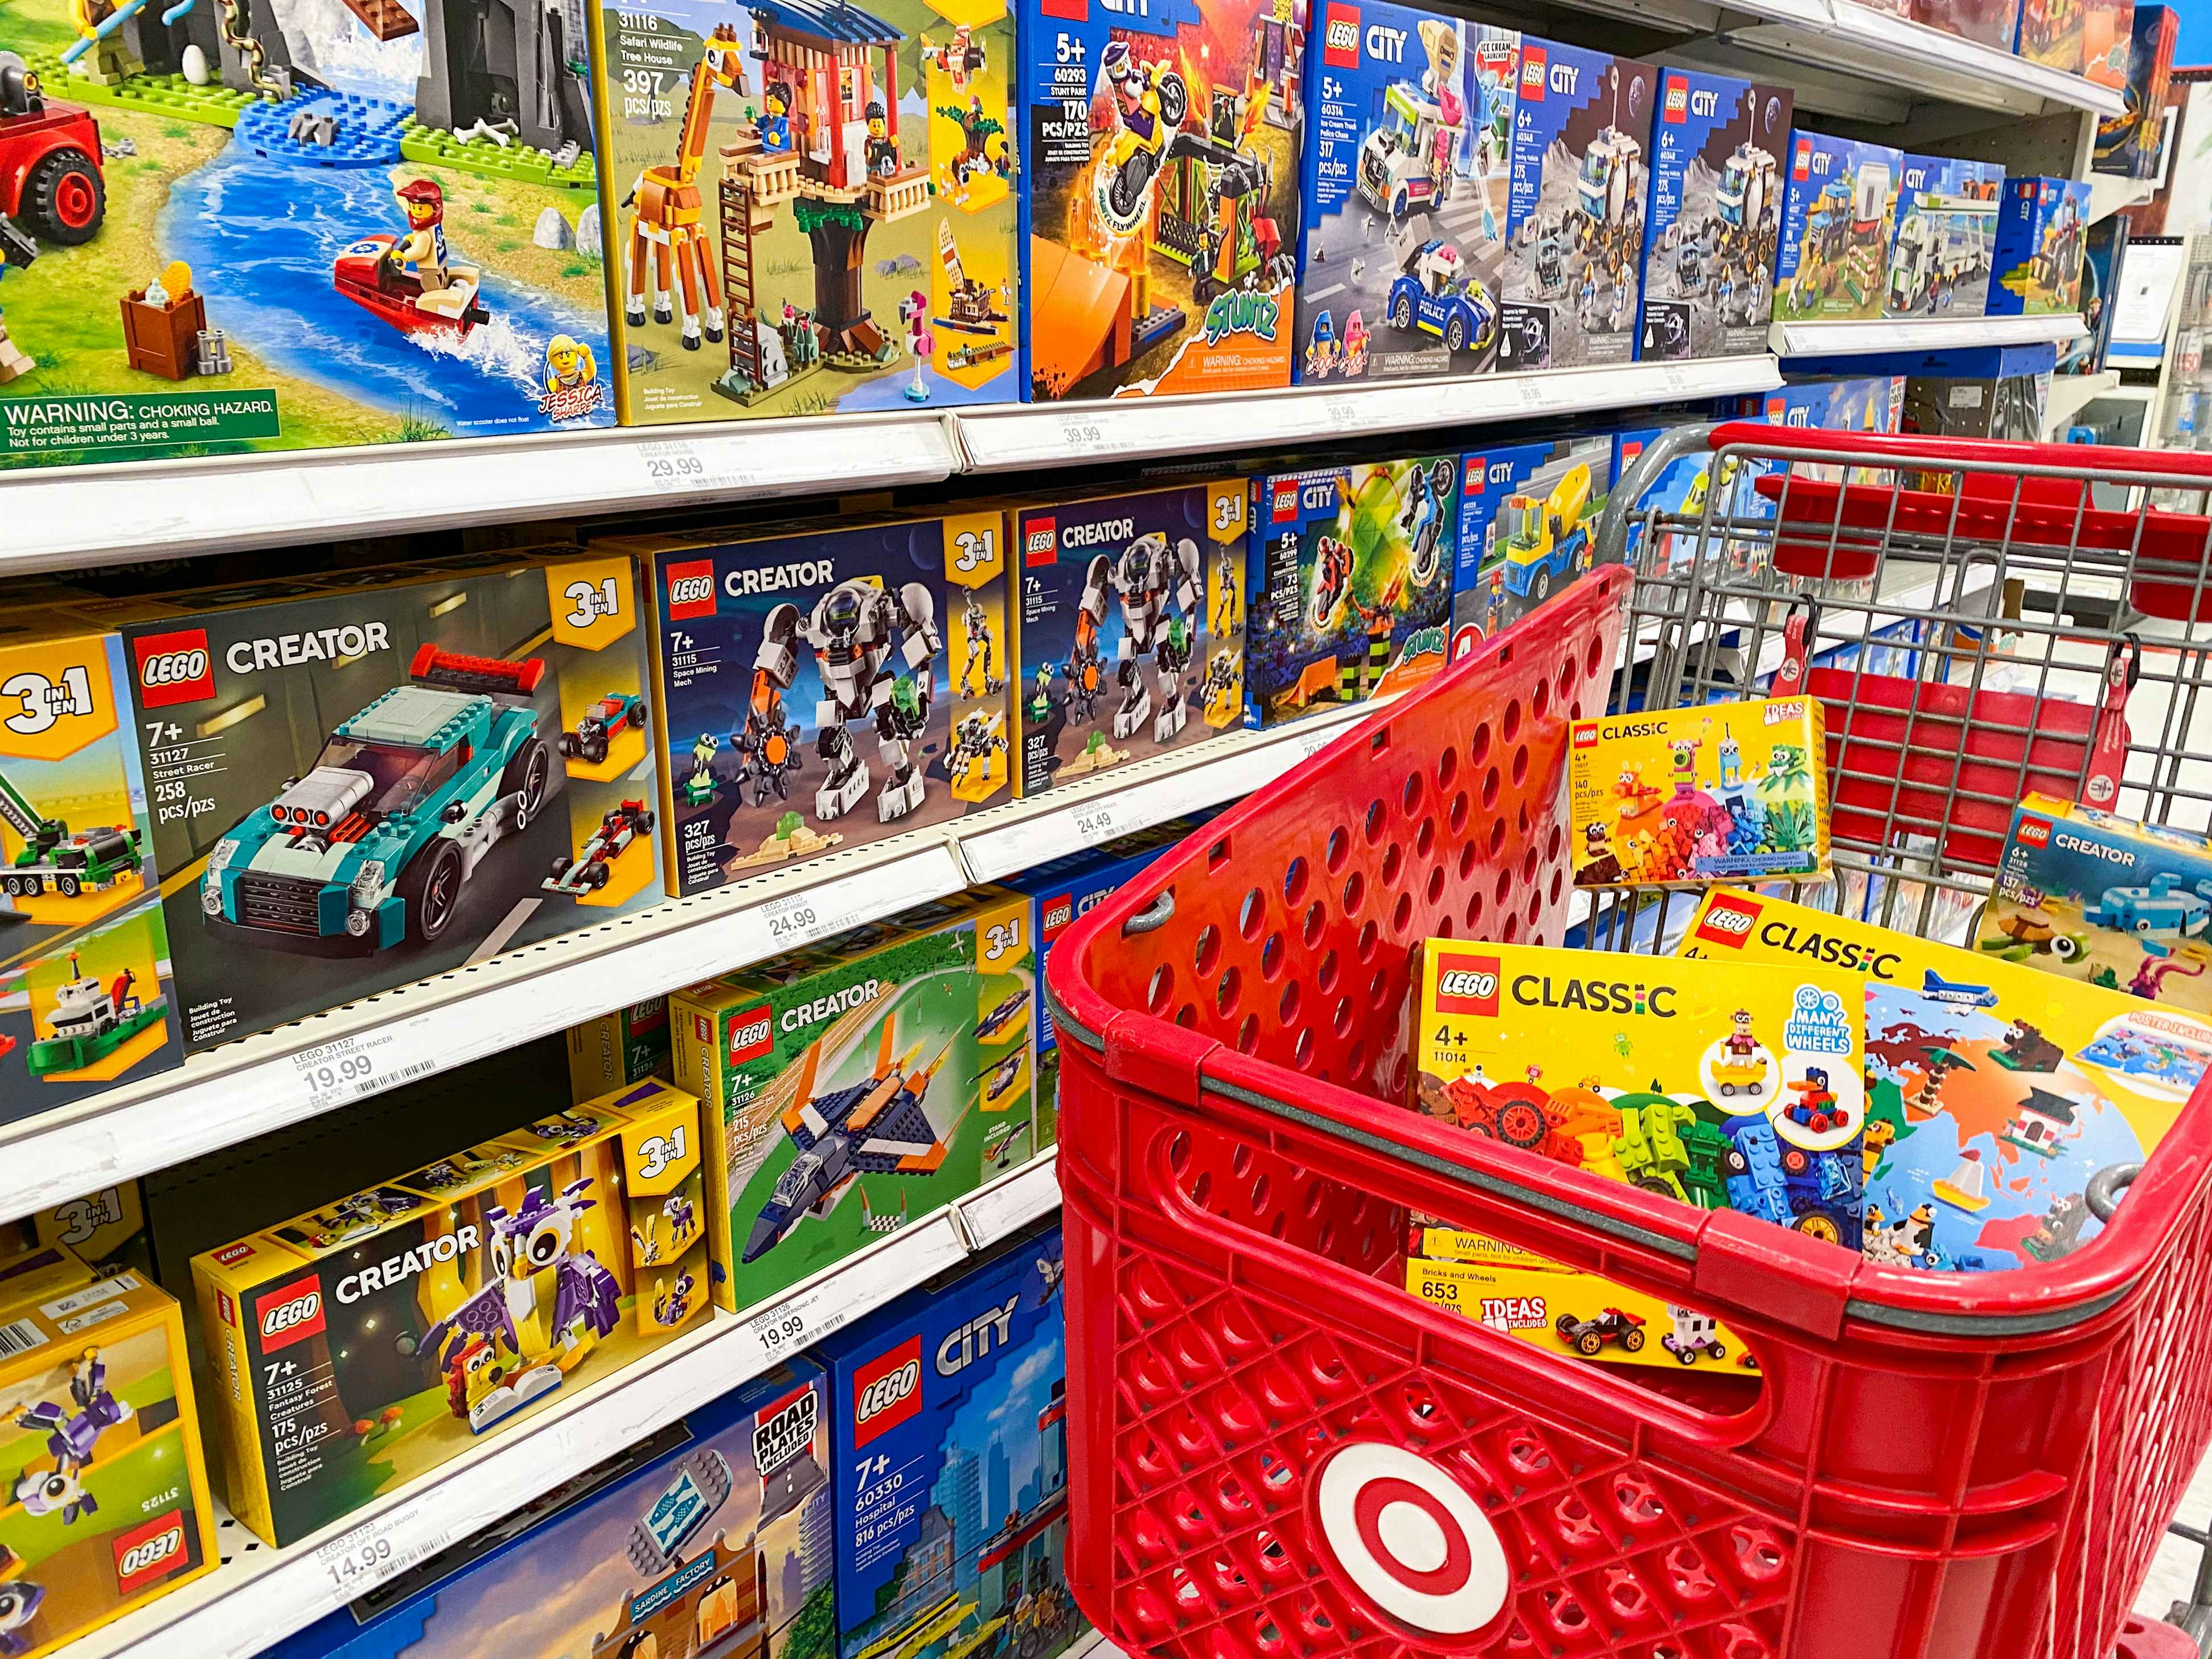 A Target shopping cart full of LEGO toys parked next to a shelf stocked with LEGO toys at Target.